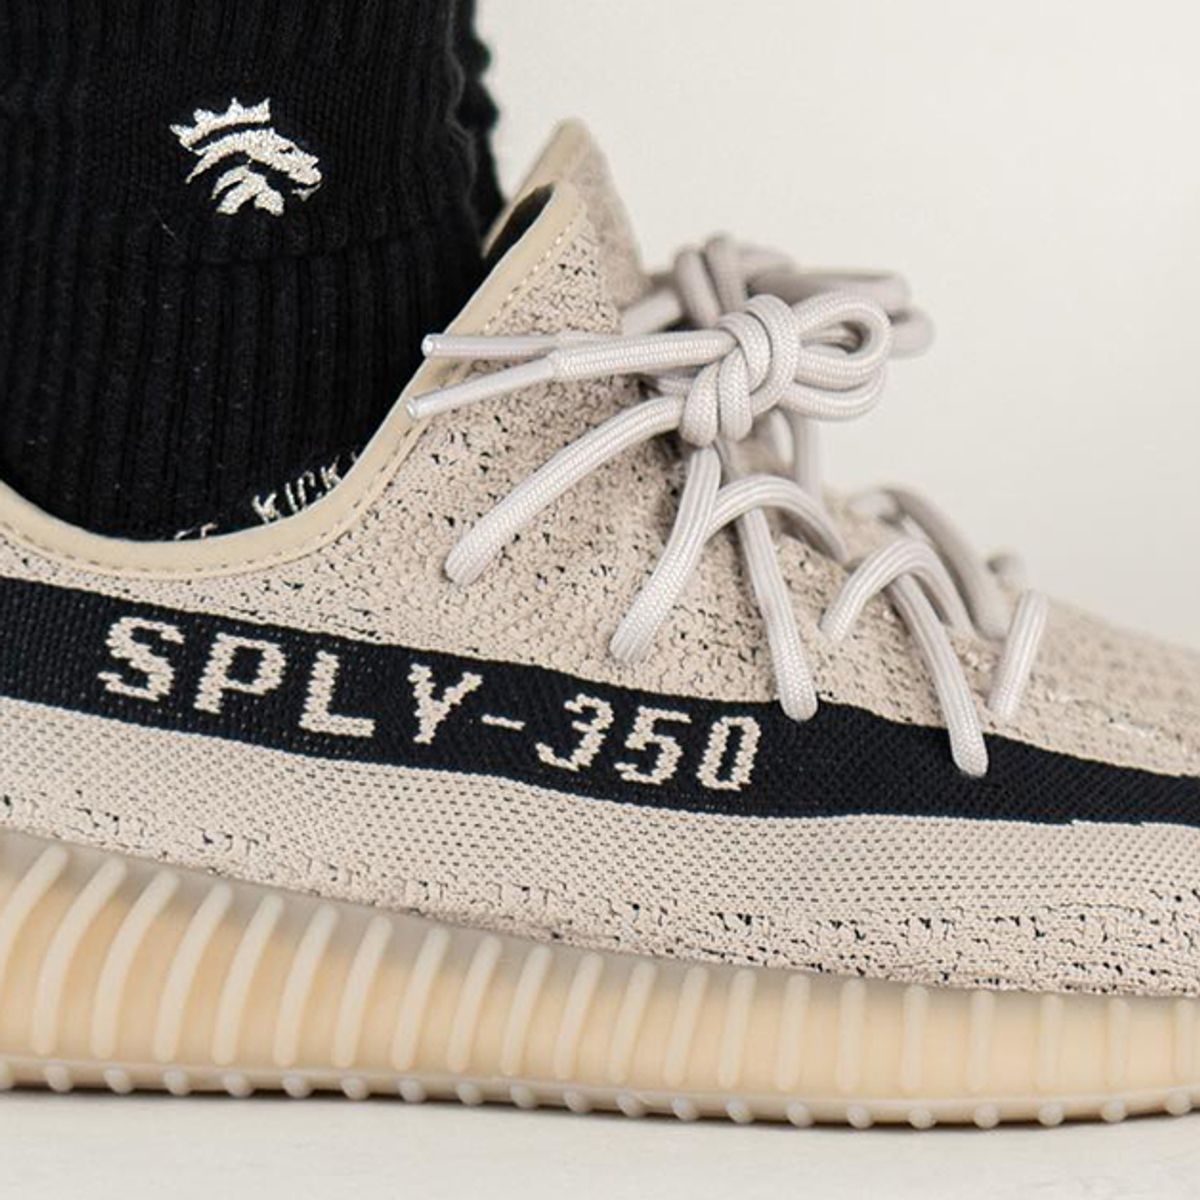 Adidas Yeezy Boost 350 V2 Low-top Sneakers